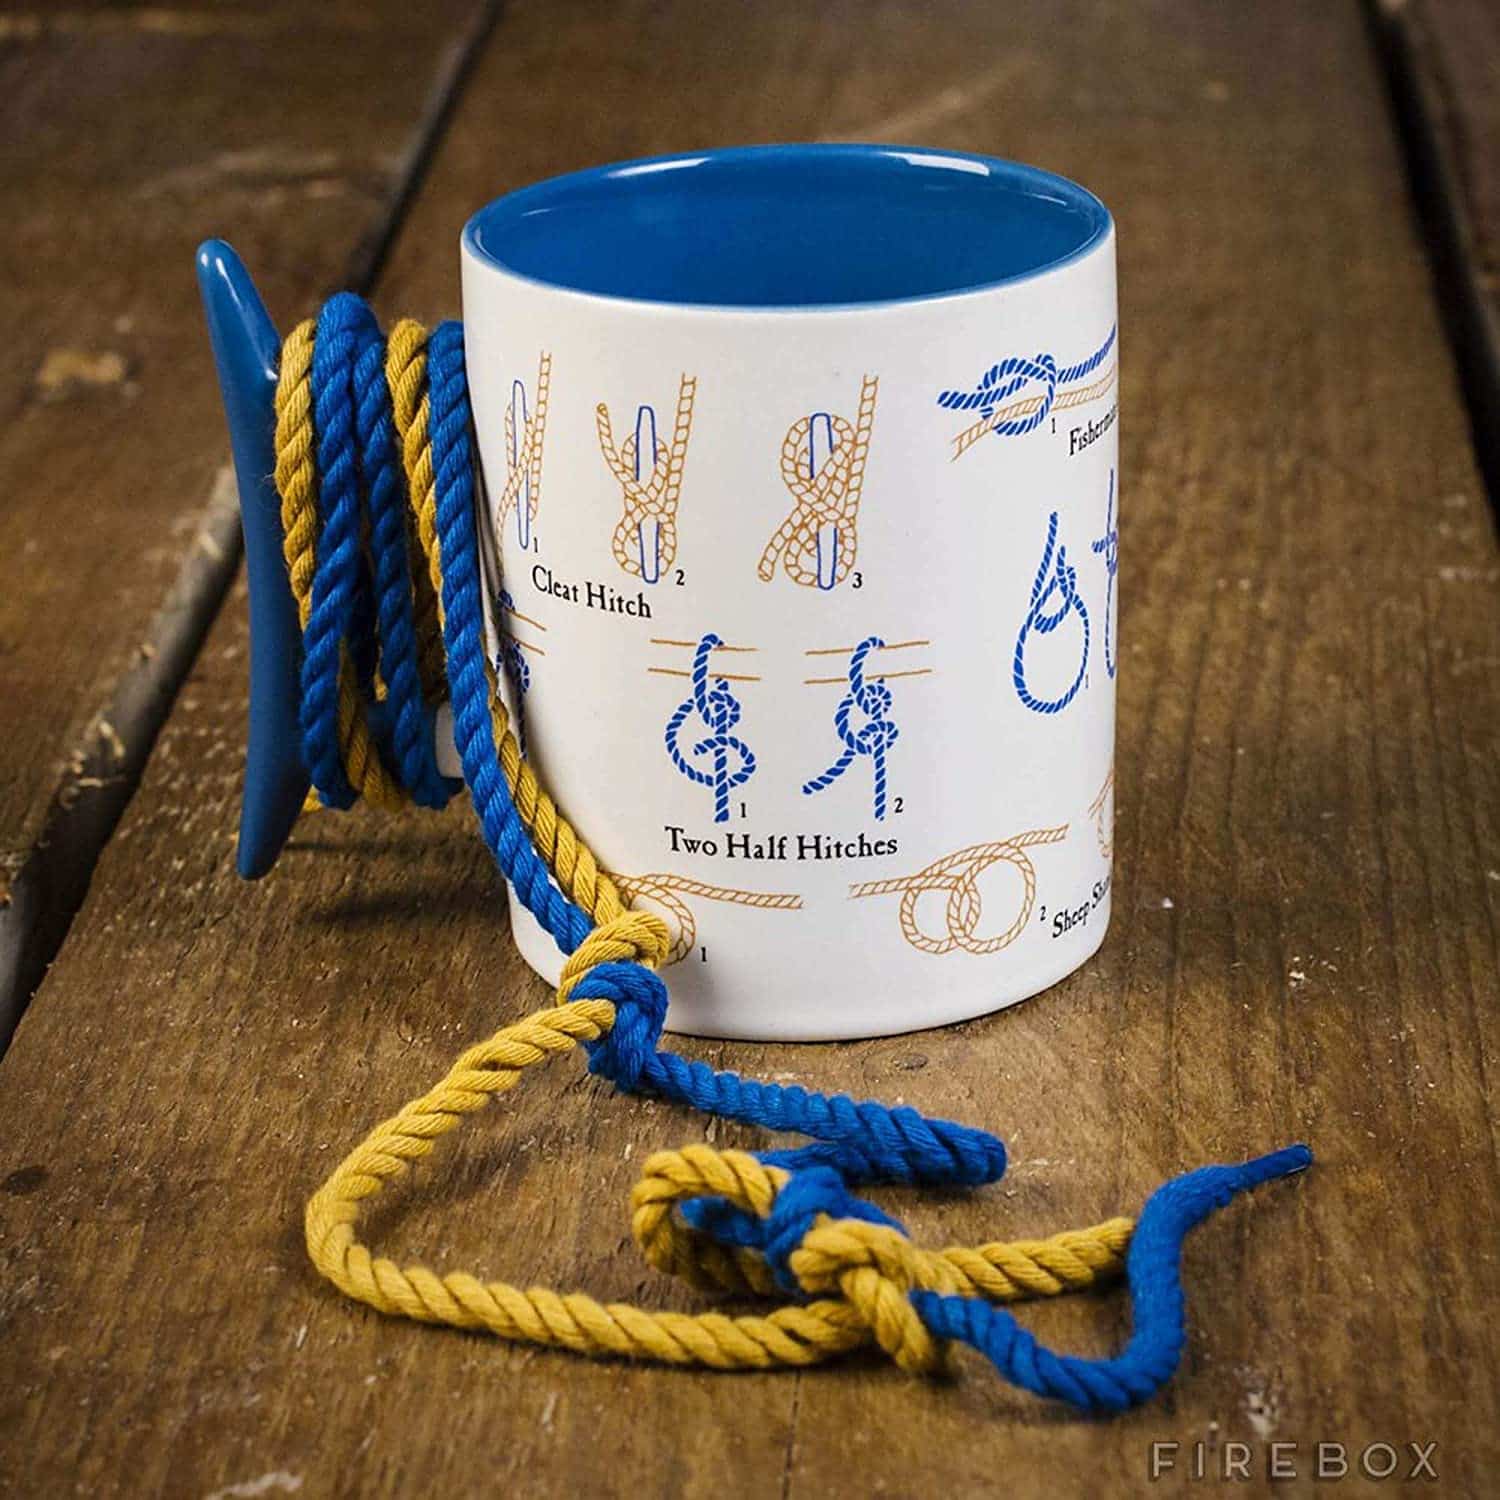 Knot Tying Guidelines in a Mug